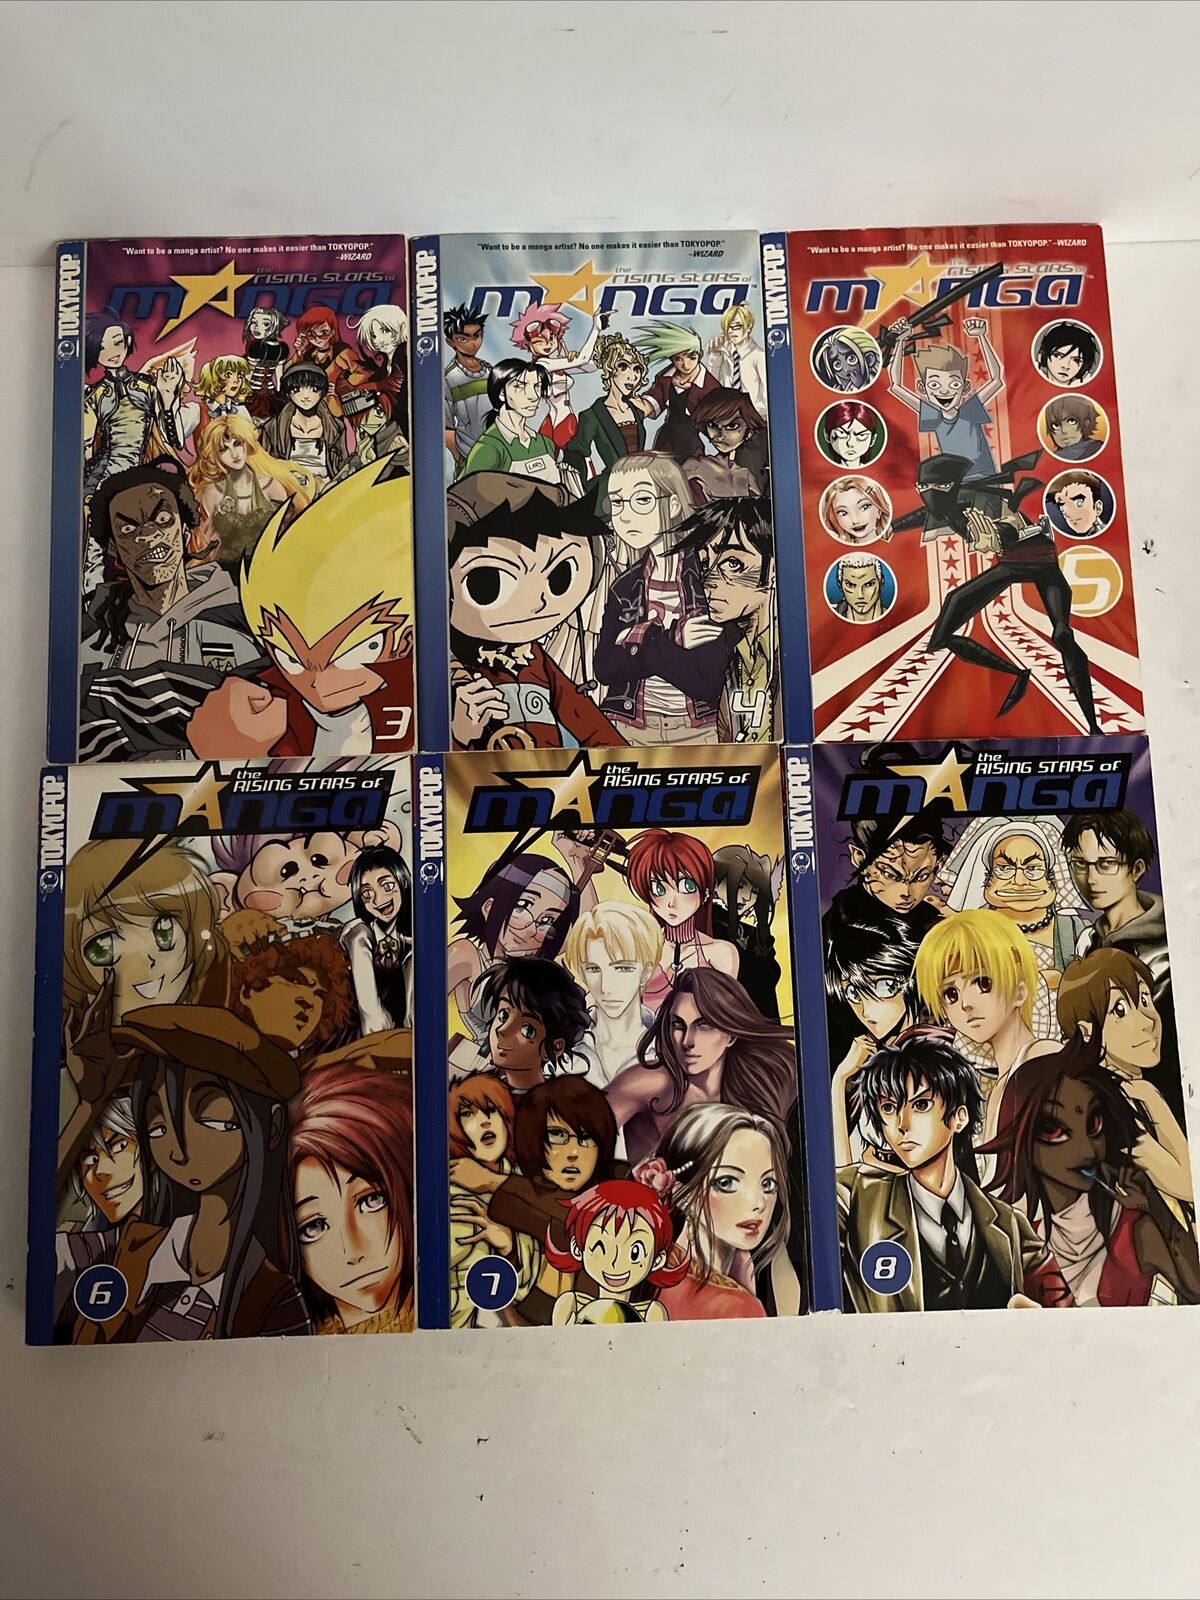 The Rising Stars of Manga Paperback Book Lot: Volumes 3-8 by Tokyopop